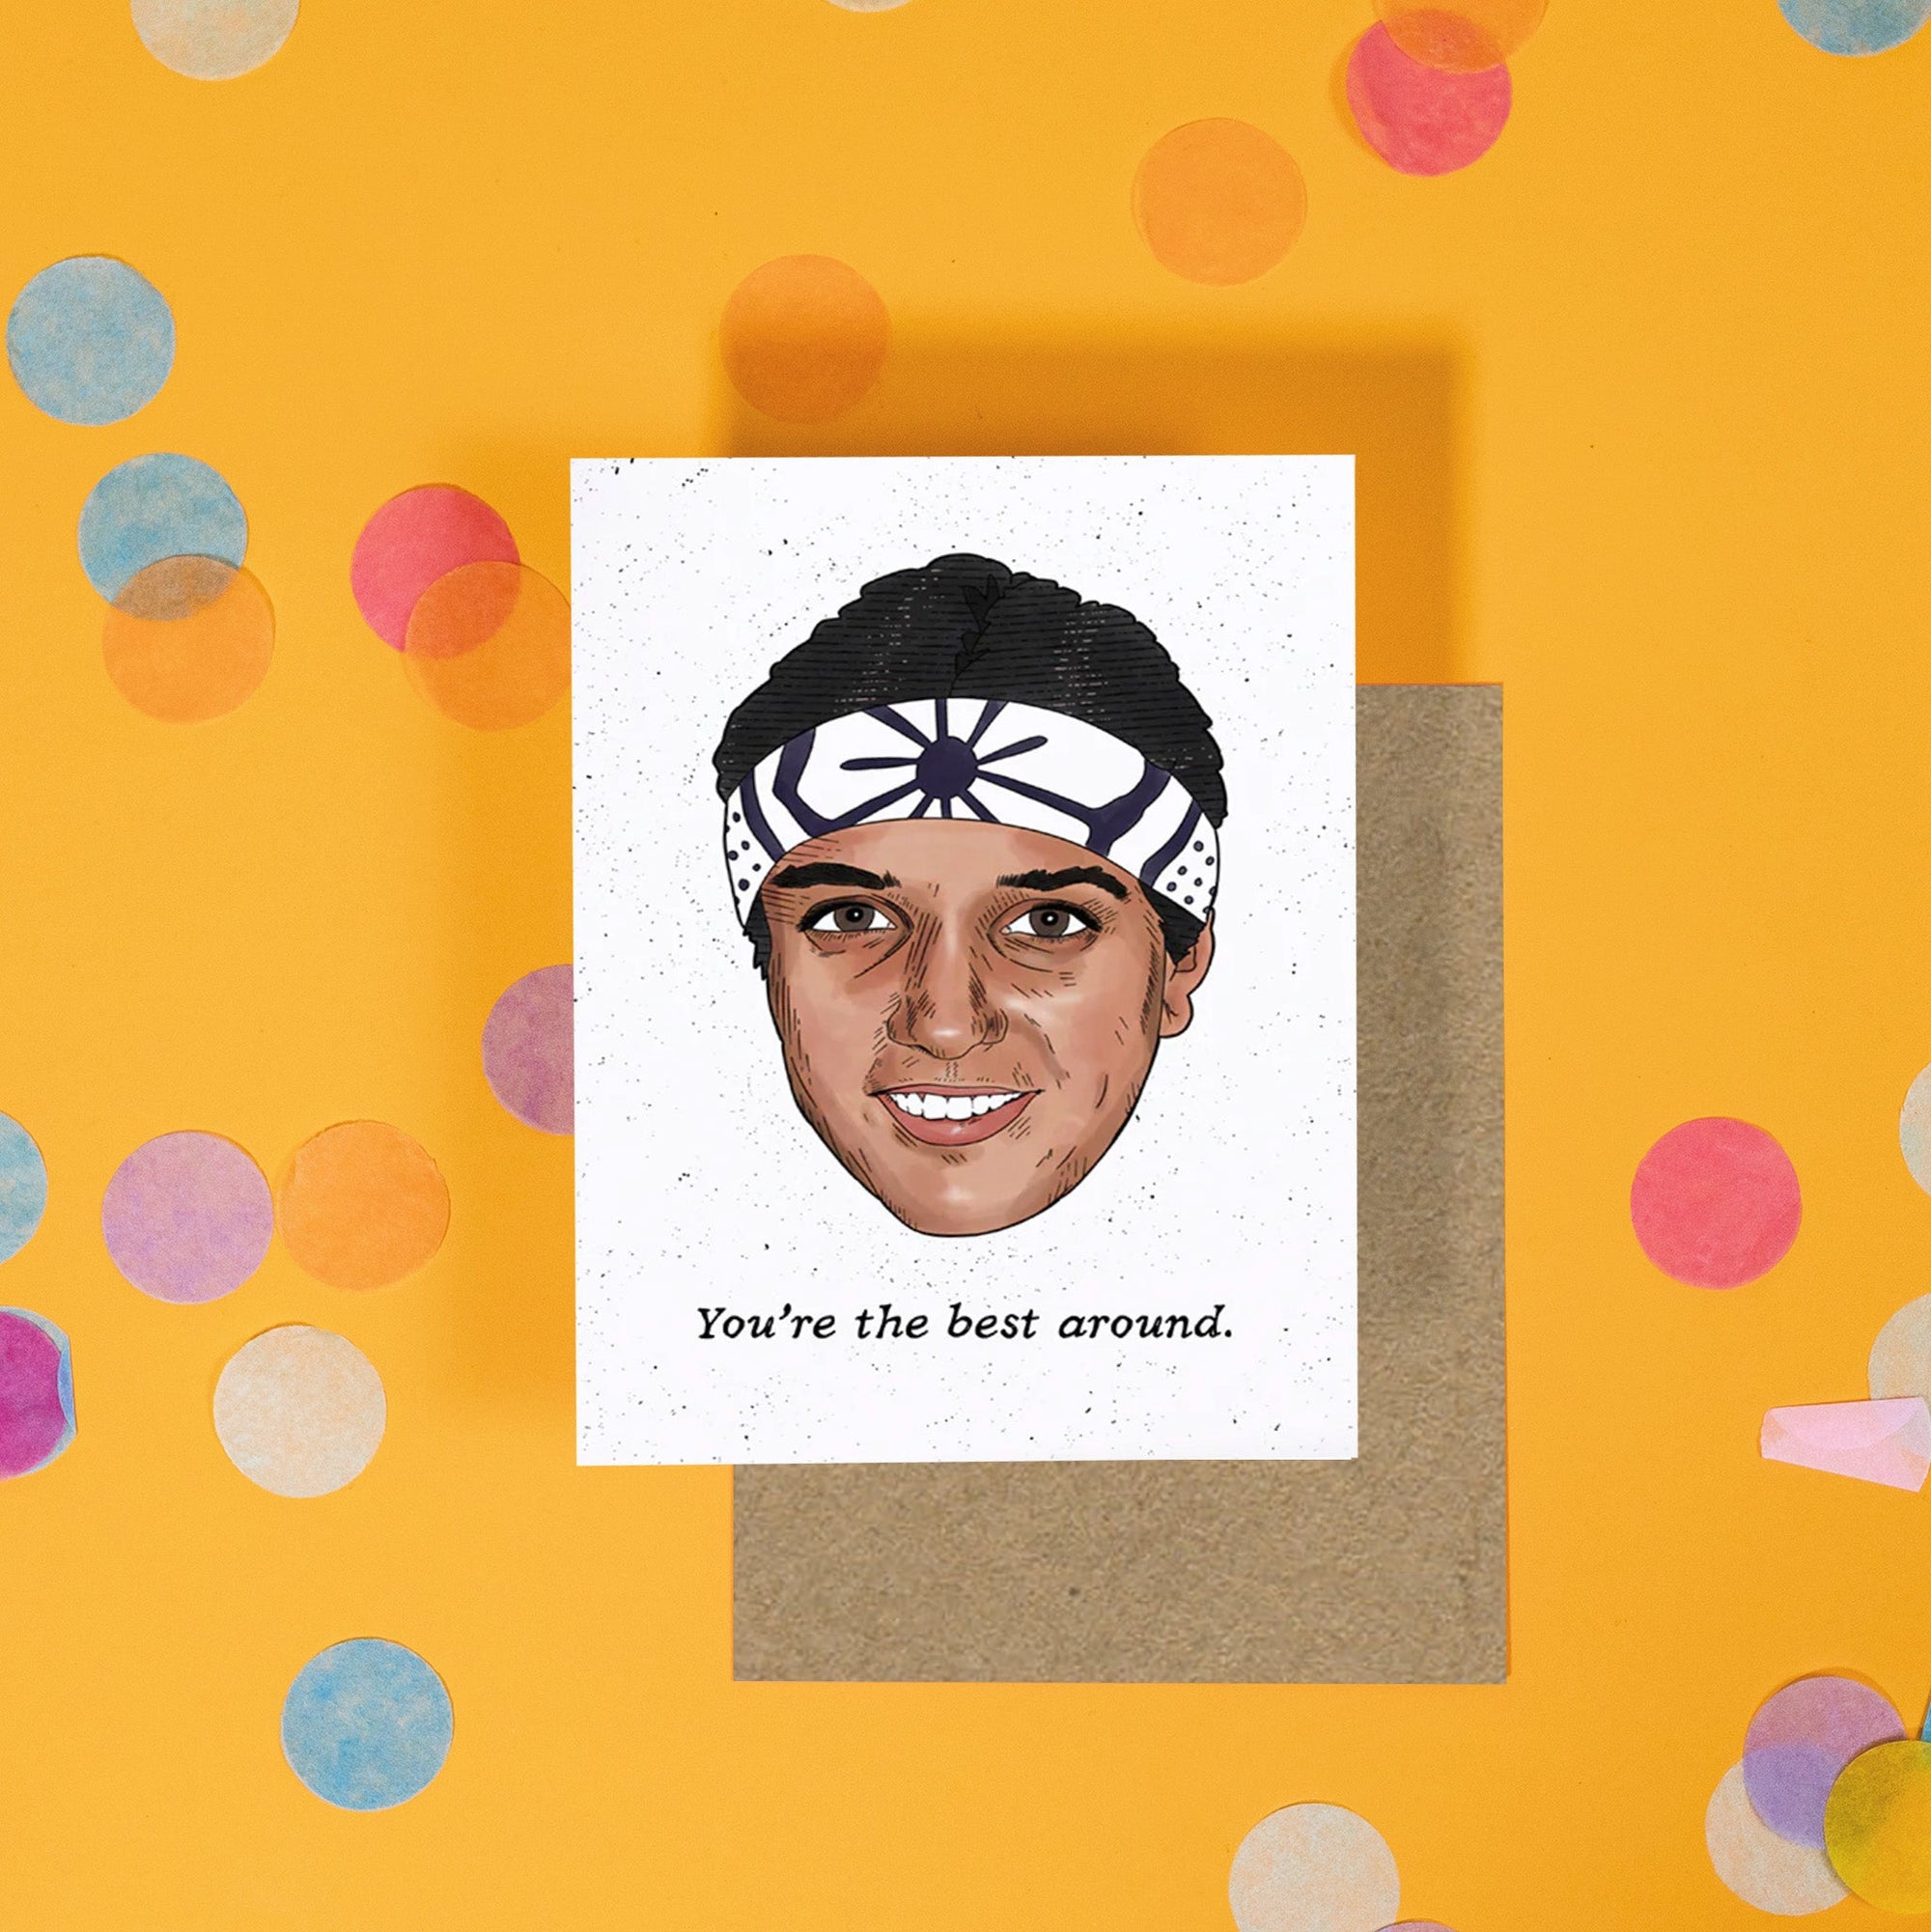 On a sunny mustard background is a greeting card and envelope with big, colorful confetti scattered around. The Karate Kid inspired white greeting card with black specks has an illustration of the Karate Kid with a black and white japanese style bandana on his head. Under it says "You're the best around." in a black handwritten lettering font. A kraft envelope sits under the card.